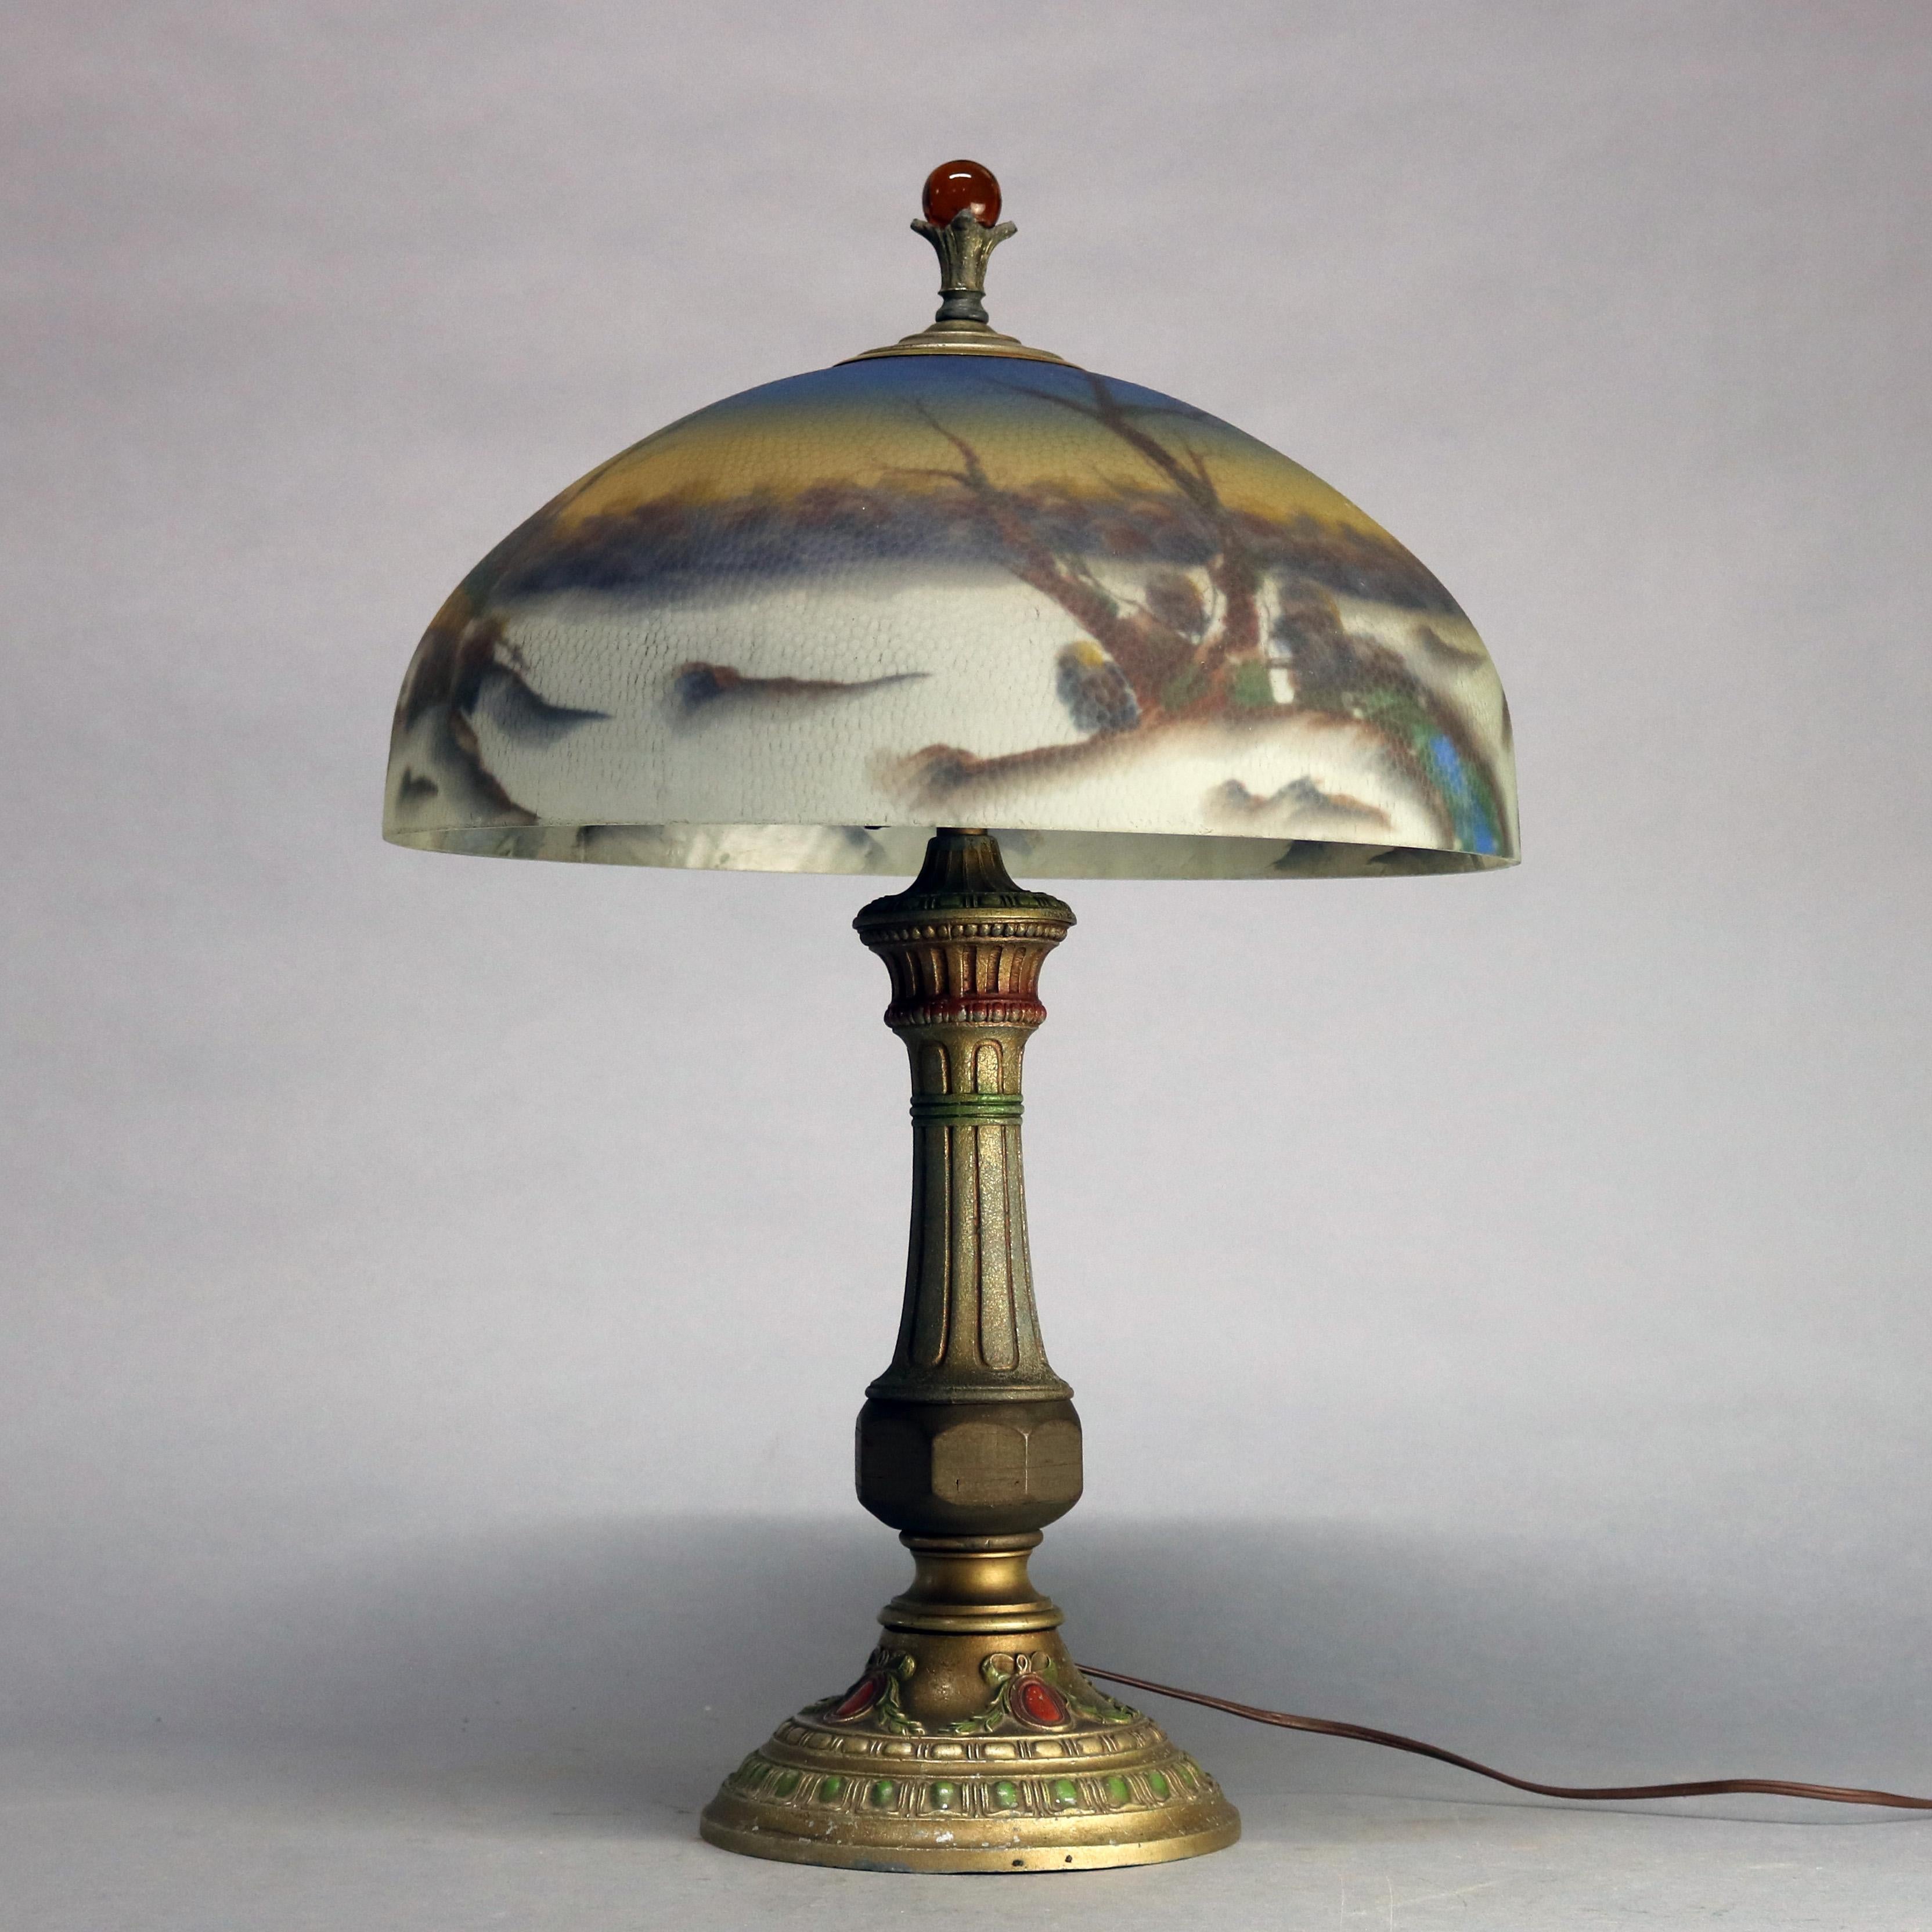 An antique Arts & Crafts table lamp in the manner of Pittsburgh offers reverse painted glass dome shade with winter landscape scene having structure surmounting polychromed cast double socket base with jeweled finial, circa 1920

Measures: 24.5